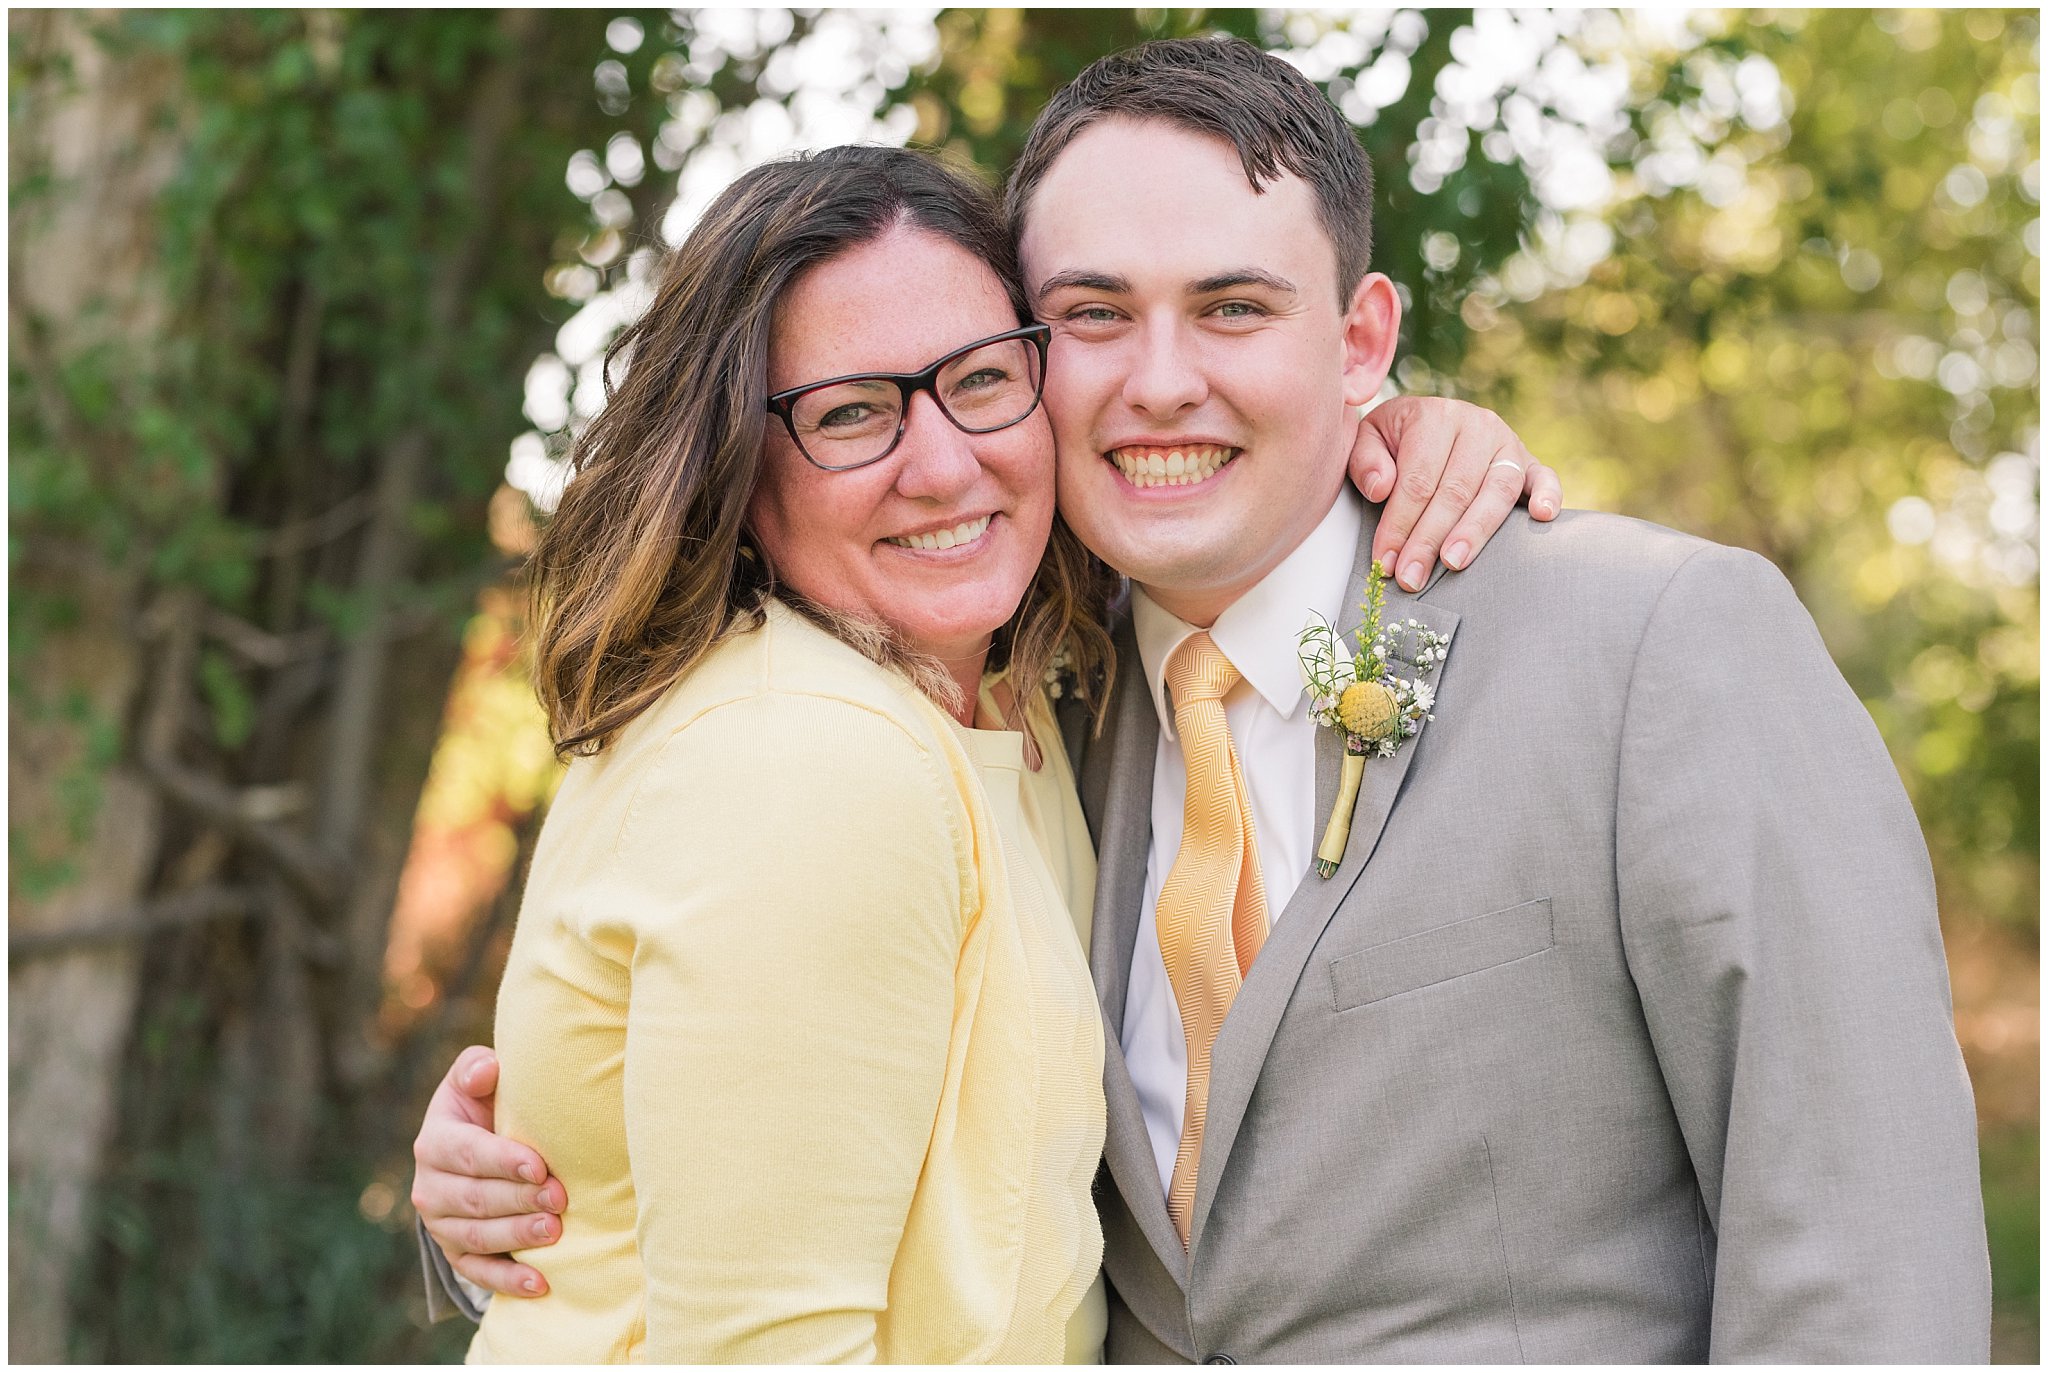 Family formal photos candid and formal | Fountain View Event Venue and Bountiful Temple Wedding | Jessie and Dallin Photography